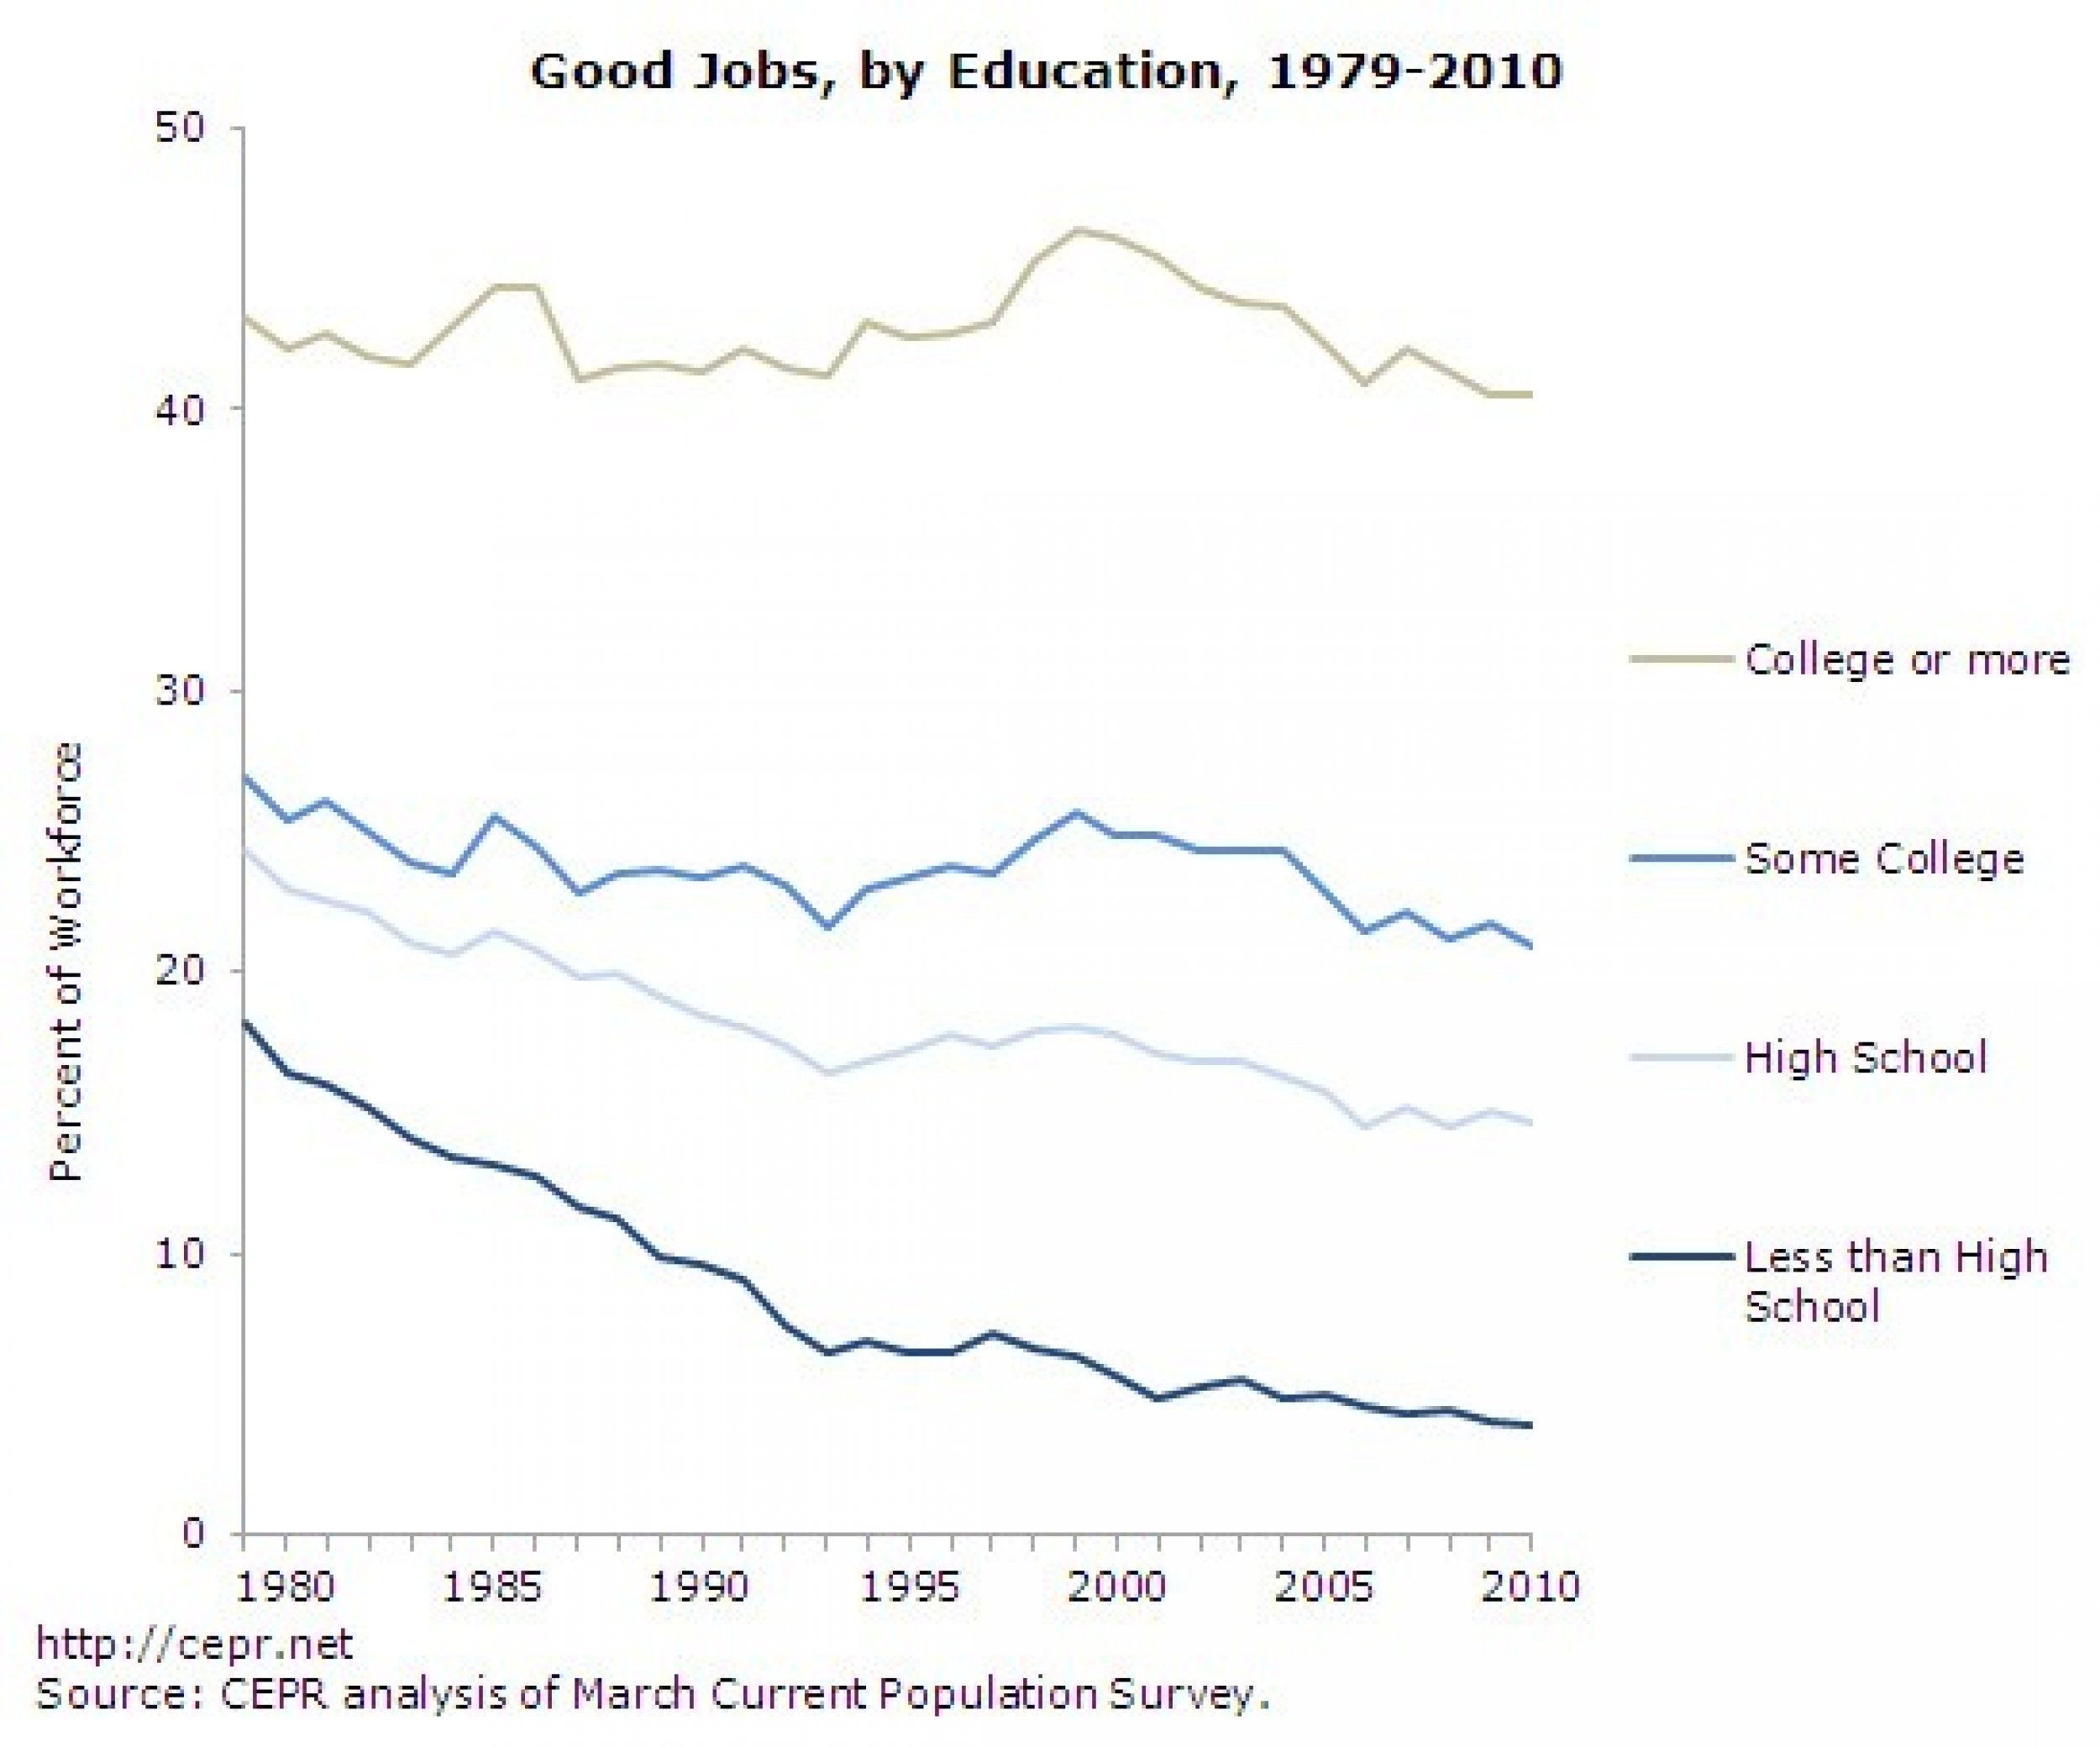 Good Jobs, by Education, 1979-2010